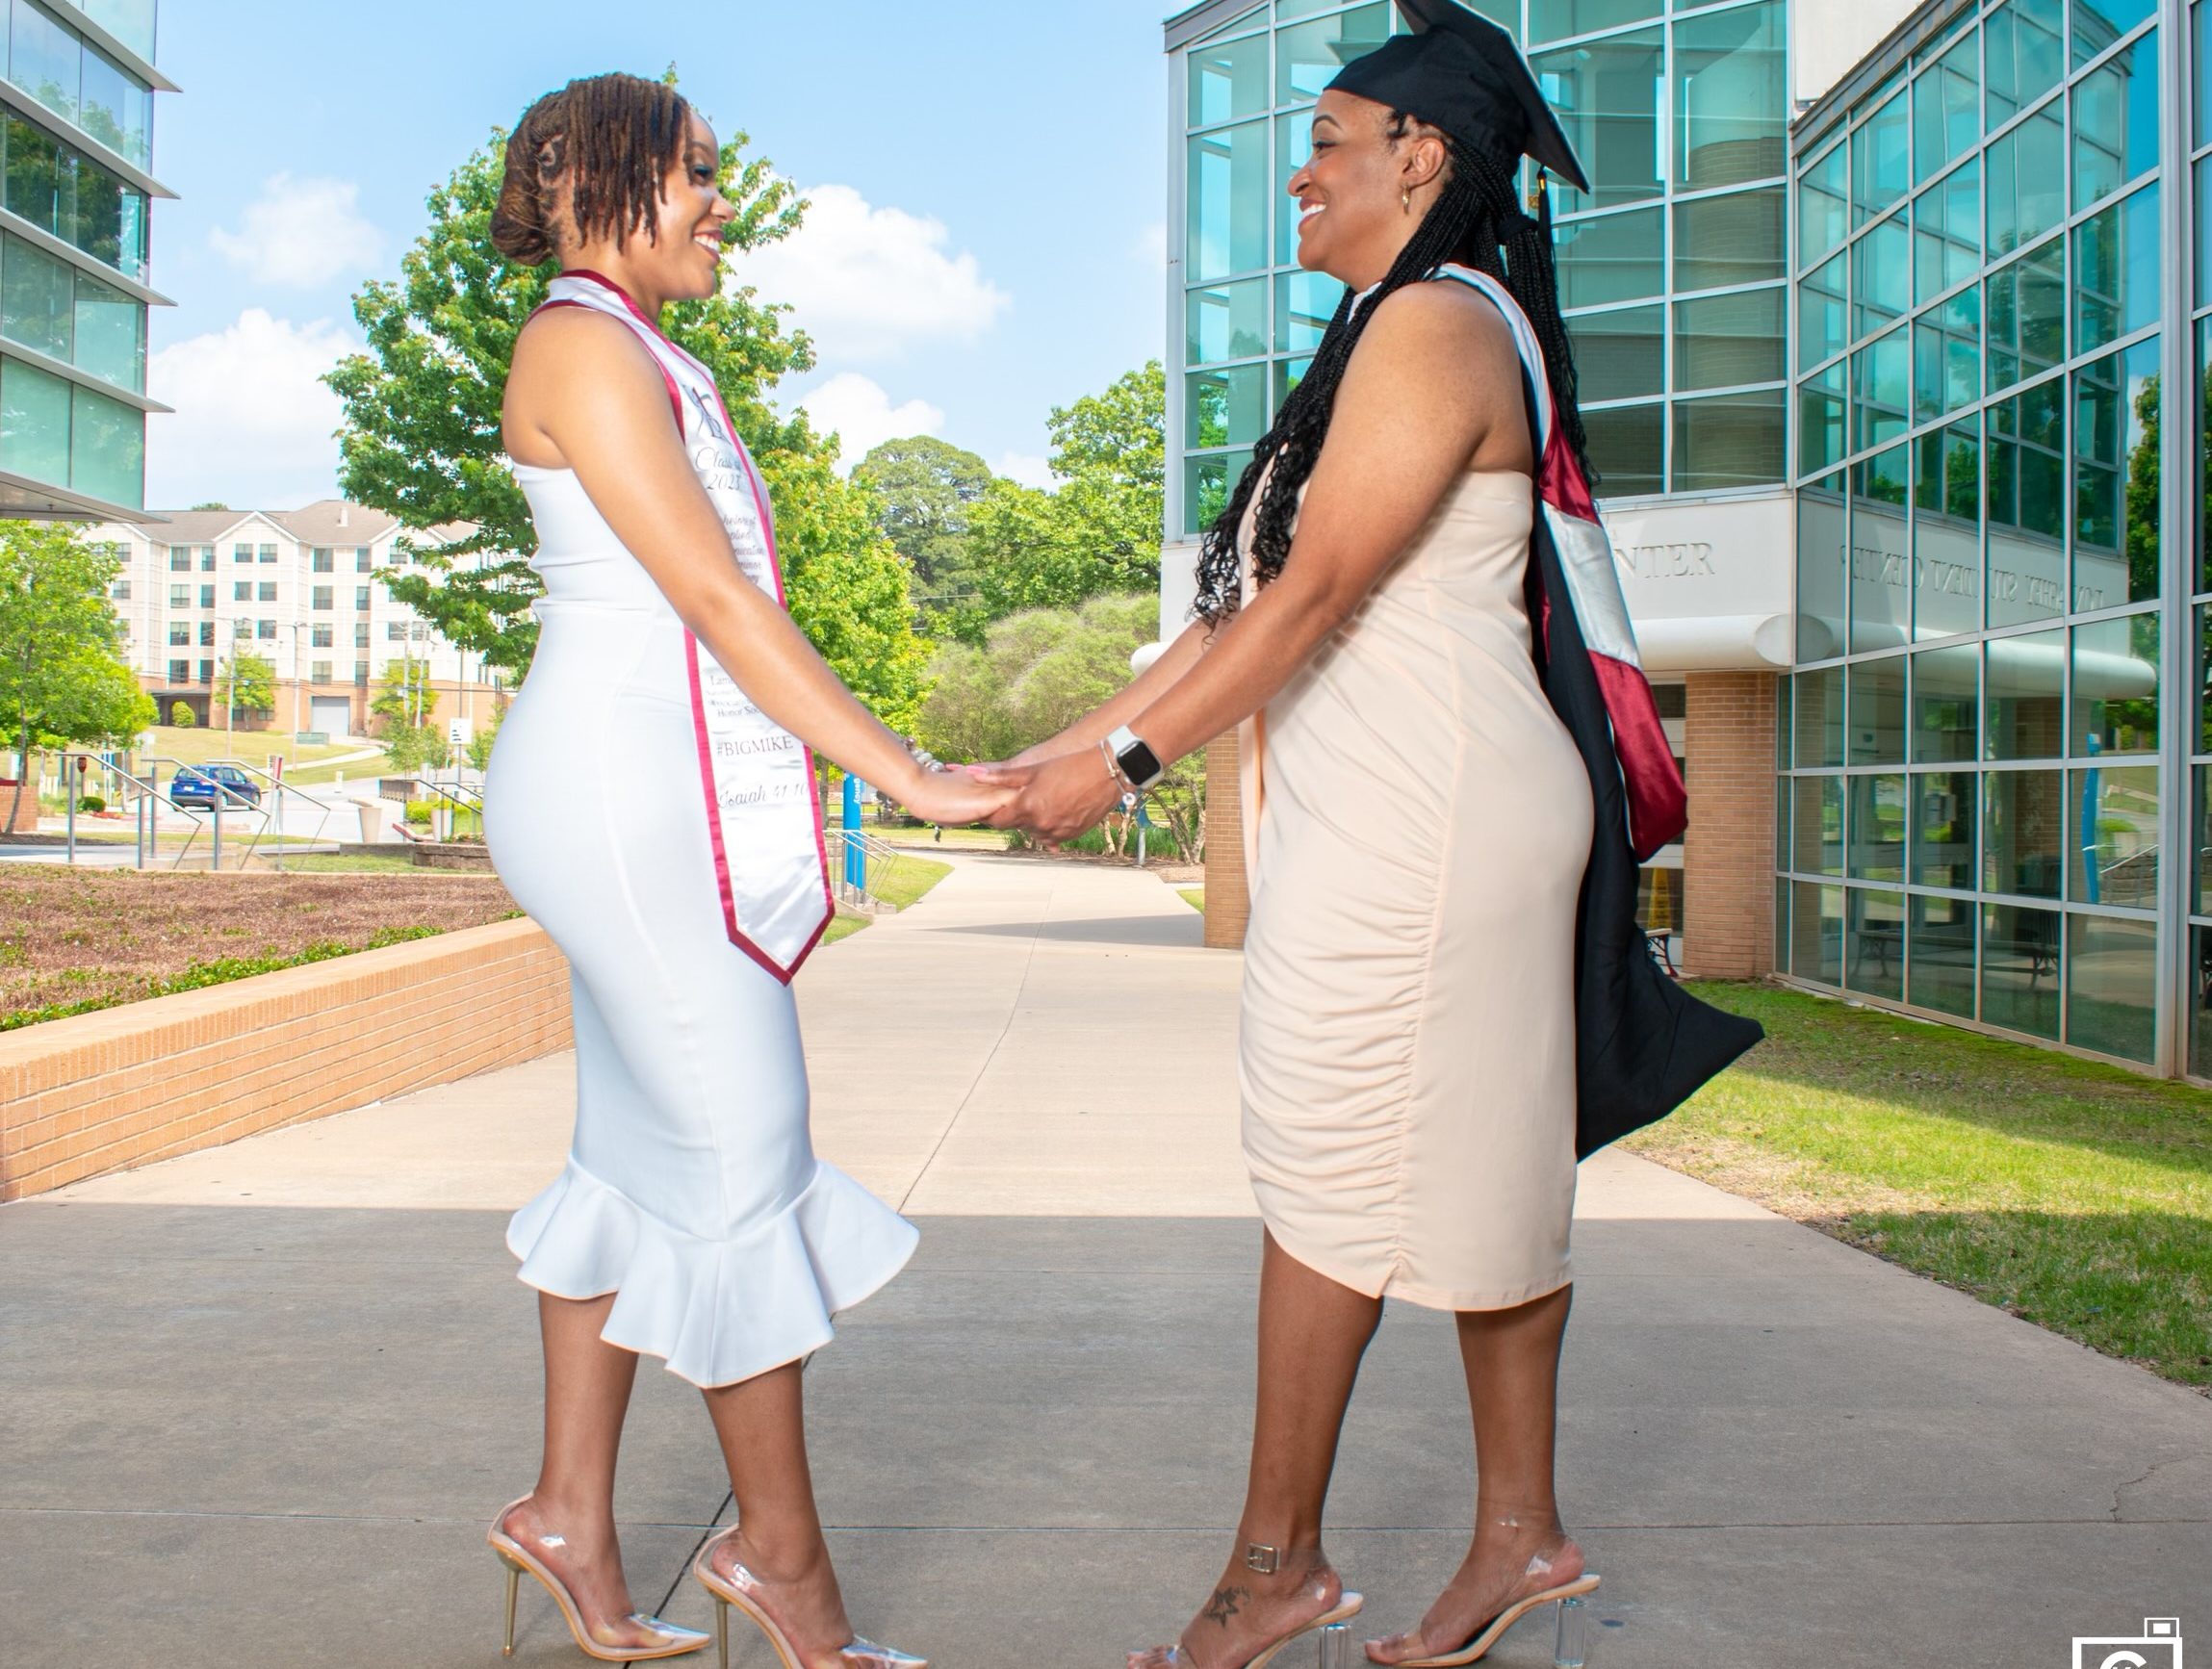 Ebene Givan graduated with a Master of Arts in applied communication studies this spring, while her daughter, Aliya Givan, has earned a bachelor’s degree in applied communication.